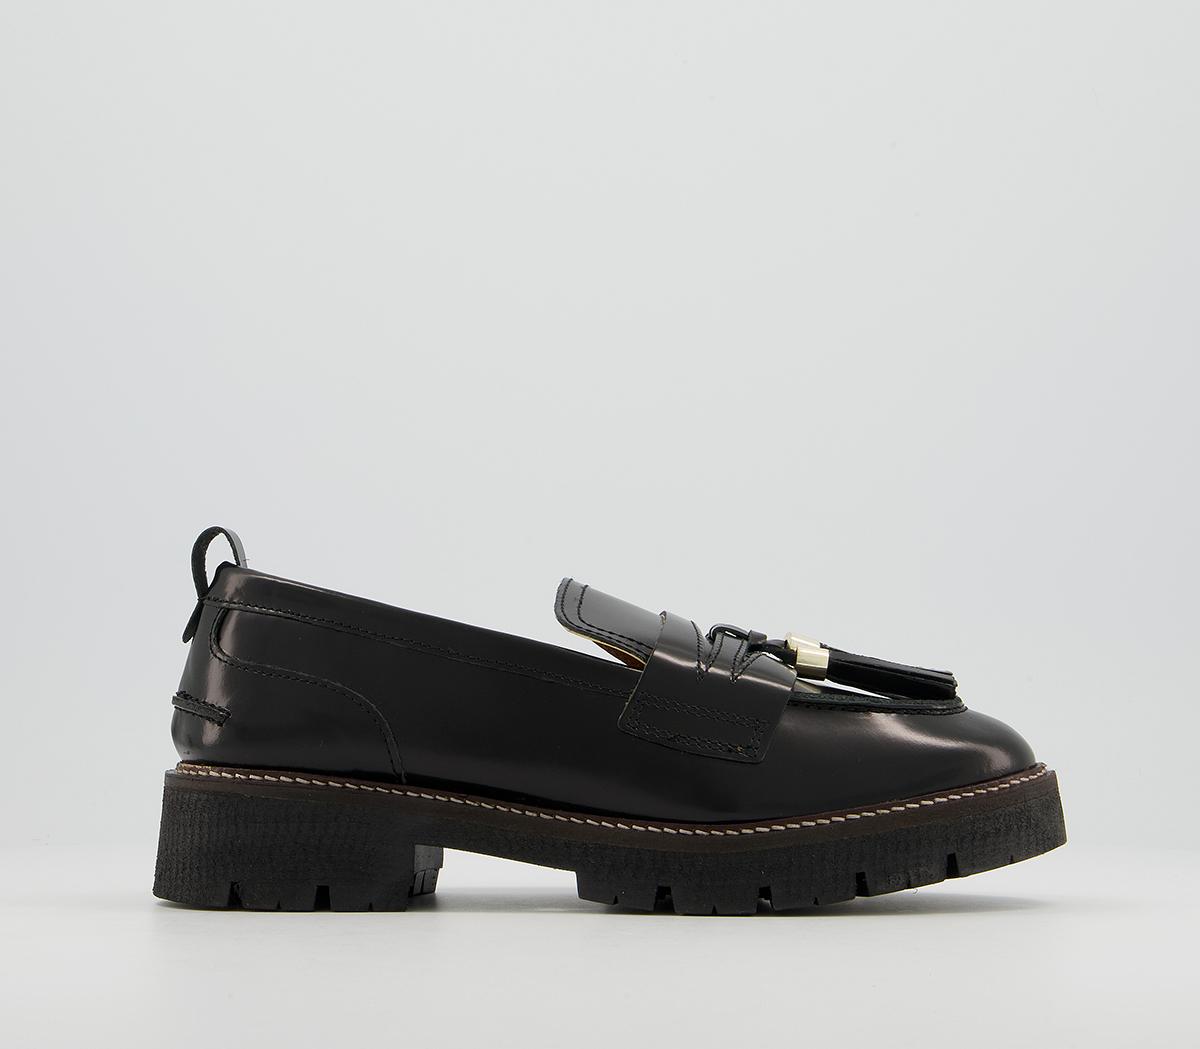 OfficeFundamental Cleated Tassel Loafer ShoesBlack Leather